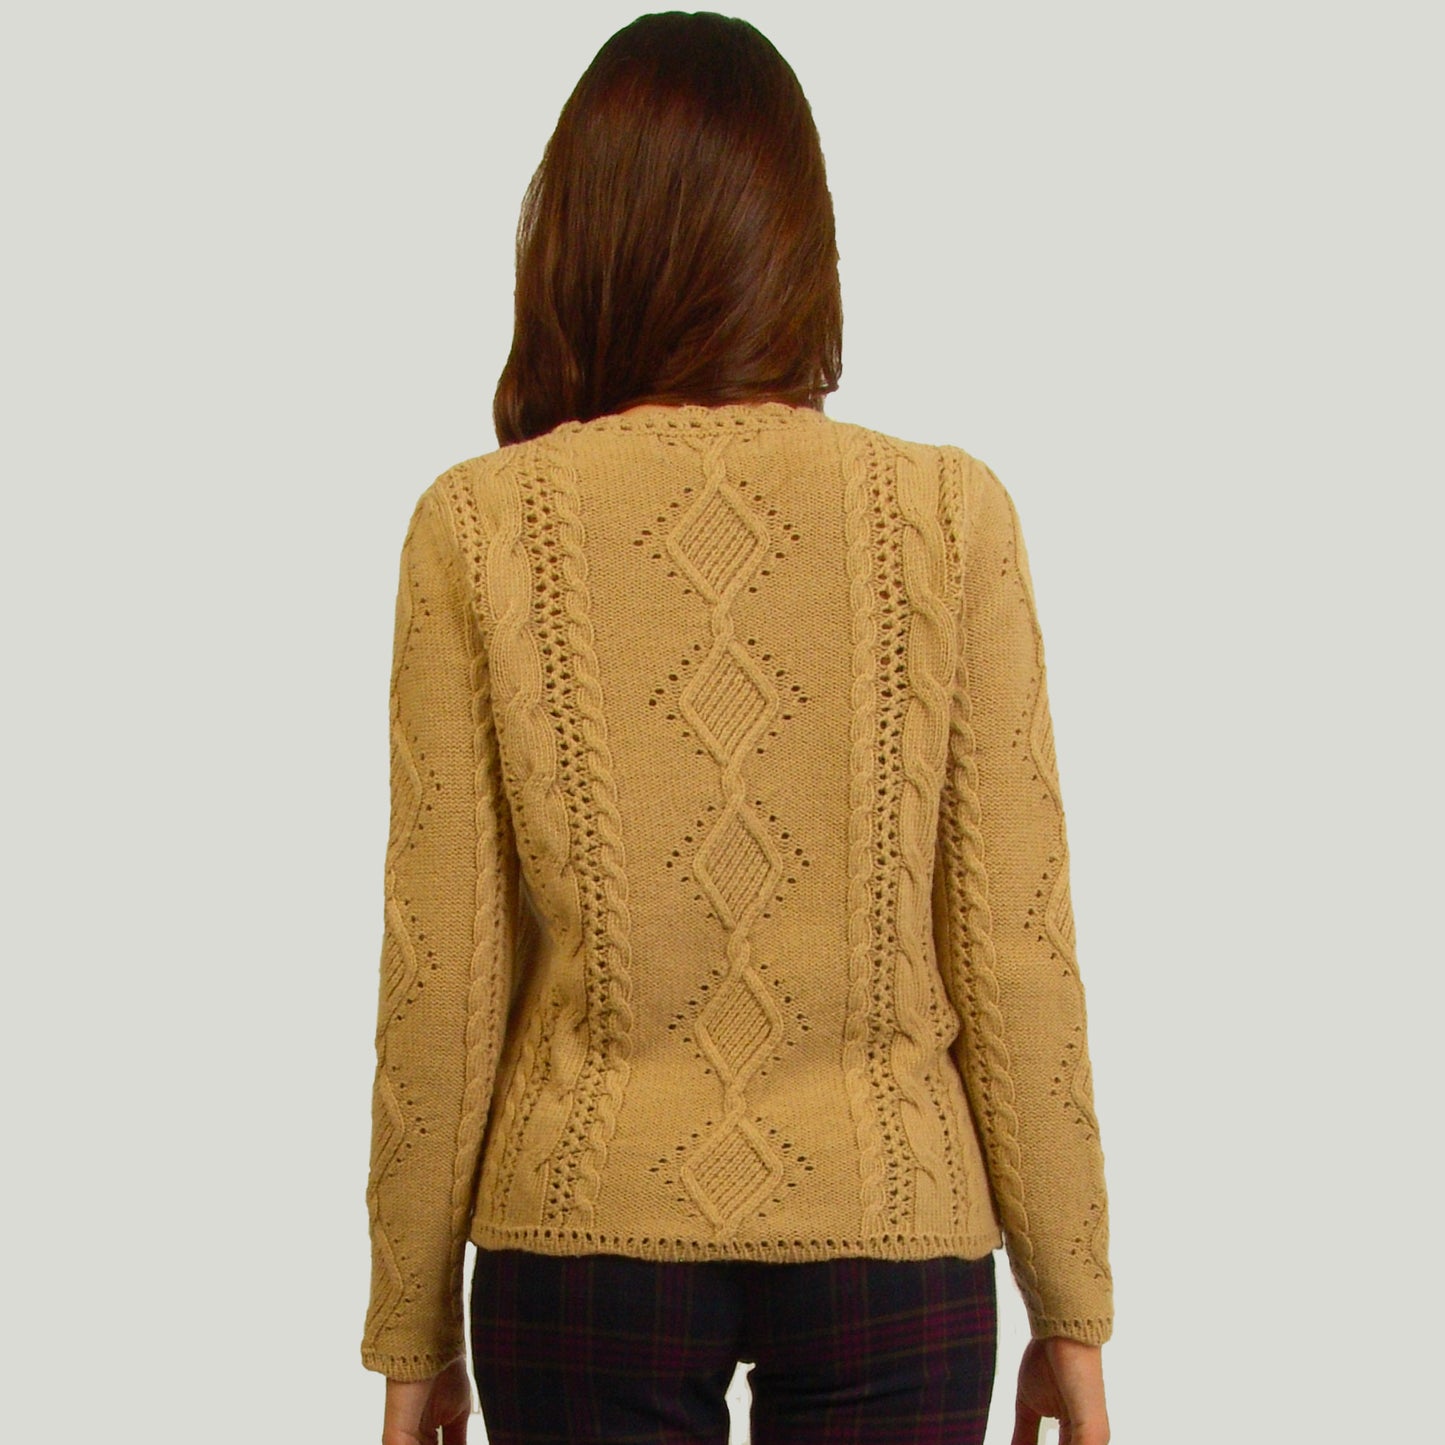 Lace and Cable Sweater for Women in virgin wool